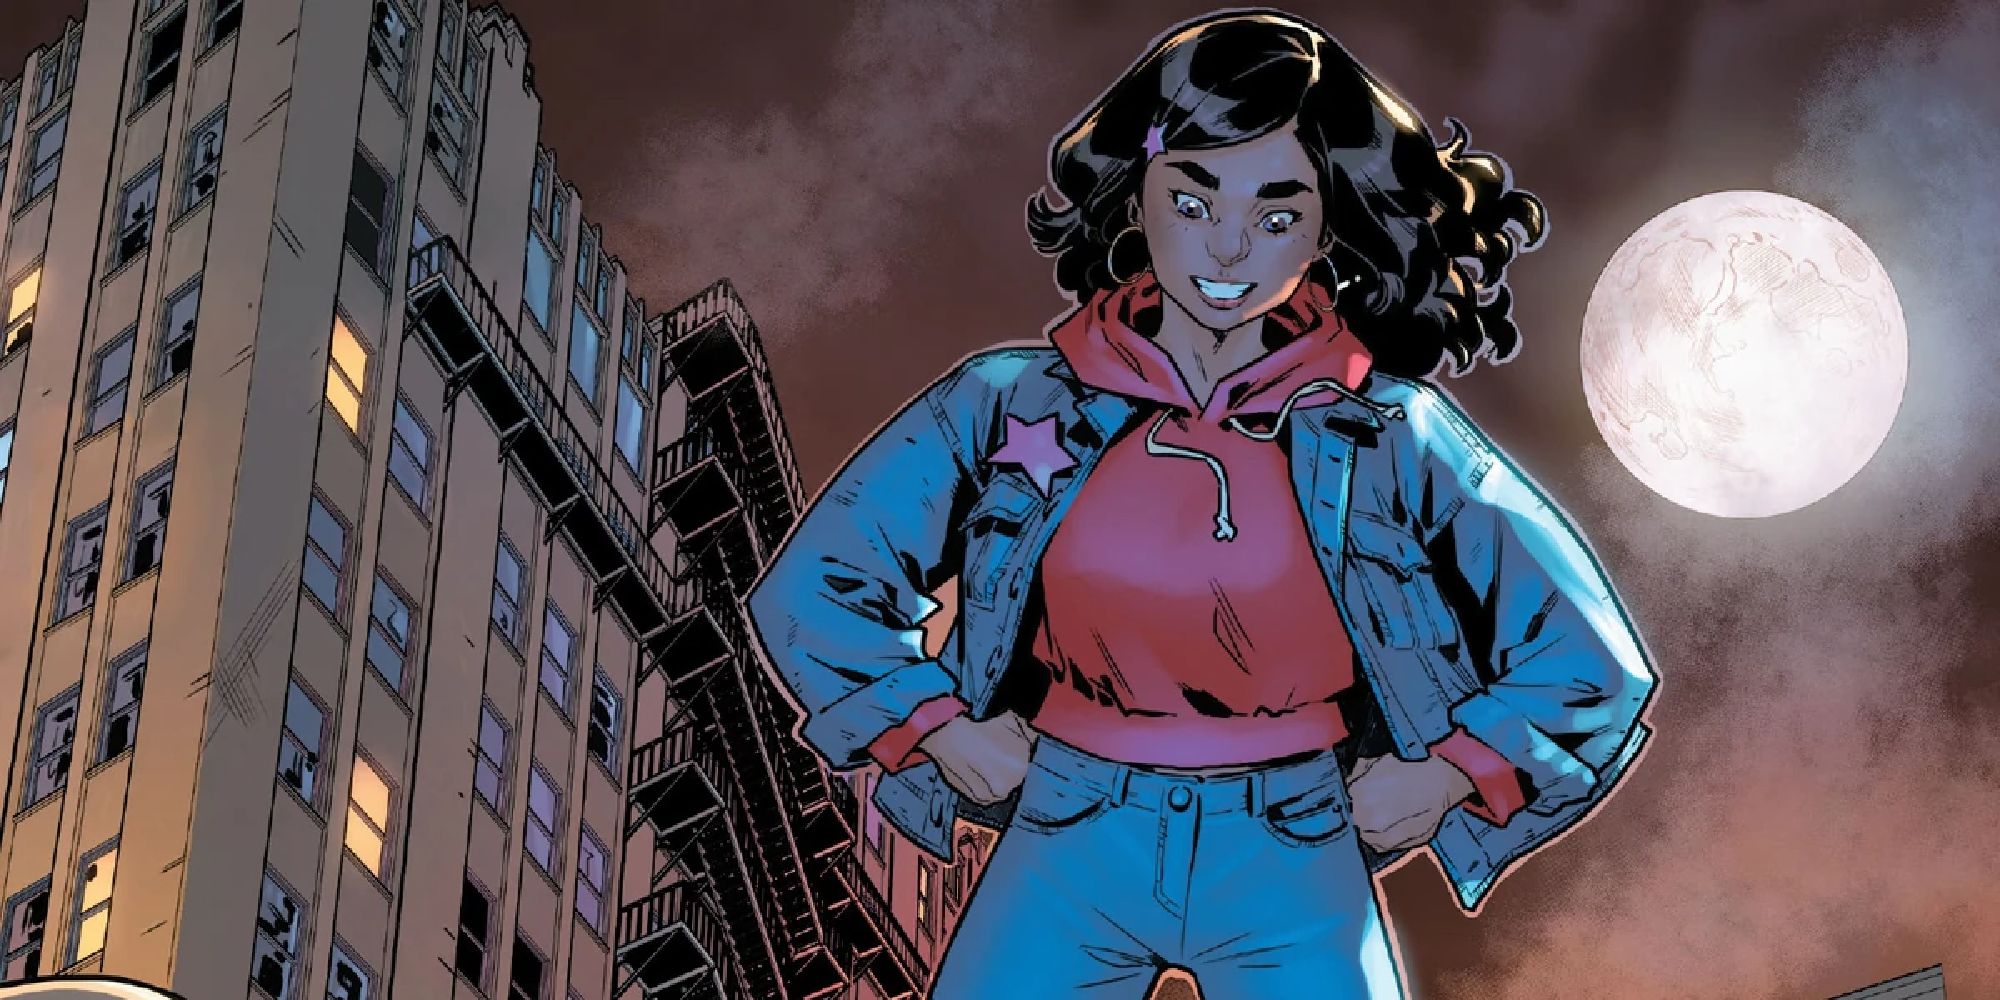 A teenage America hovering above criminals at night in the comics